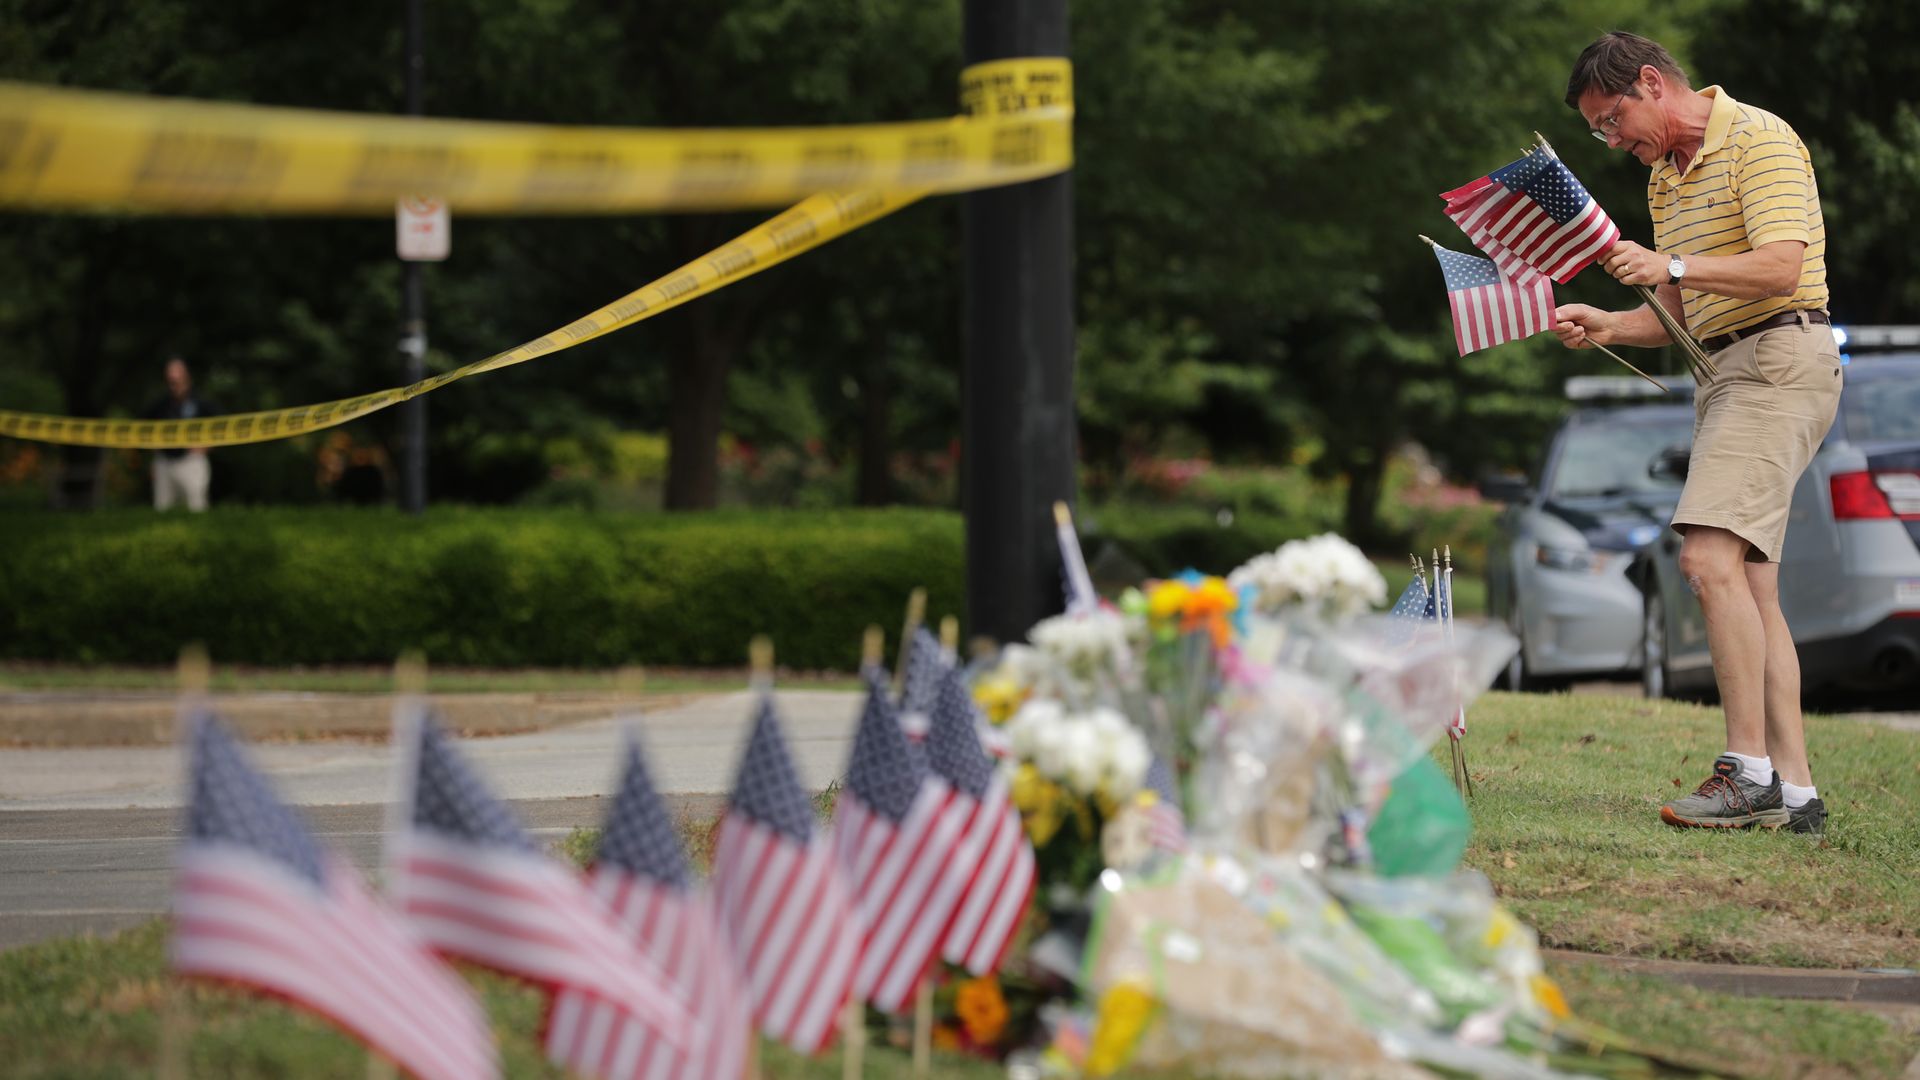 Rich Lindgren places 12 U.S. flags in the ground at a makeshif memorial outside of the crime scene at the Virginia Beach Municipal Center June 01, 2019 in Virginia Beach, Virginia. 